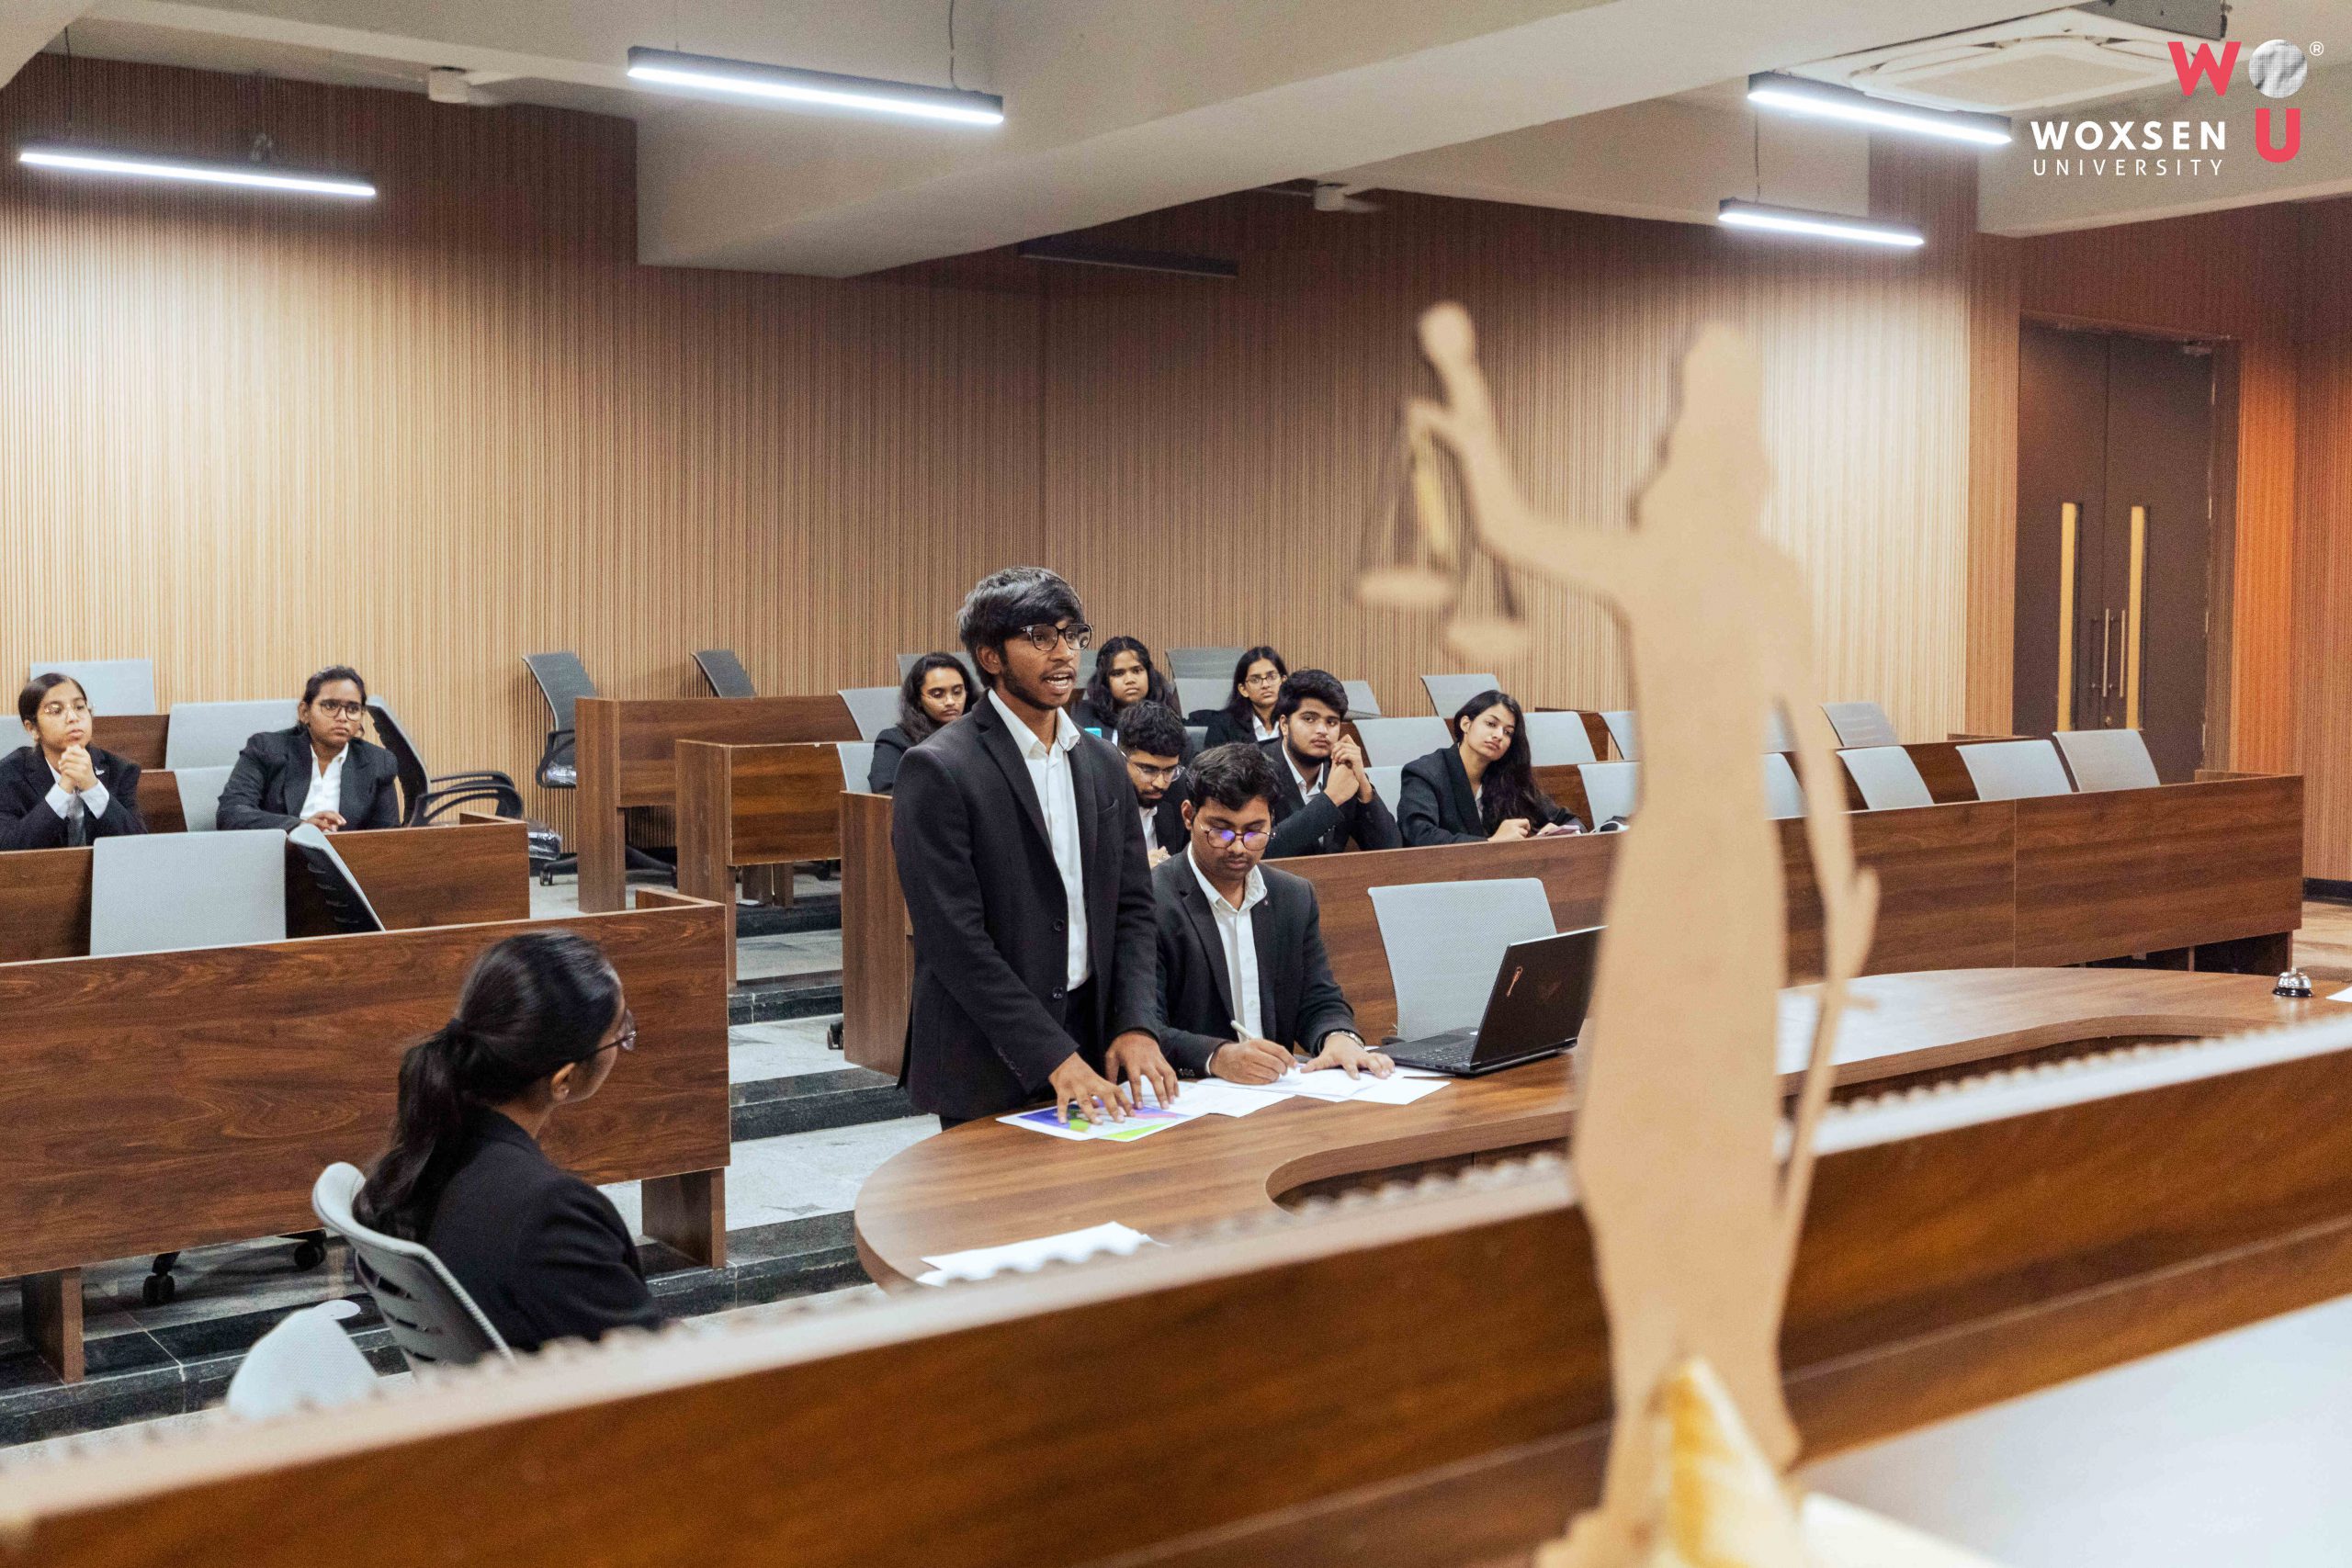 Best B.A Honors Degrees for Aspiring LLB Students